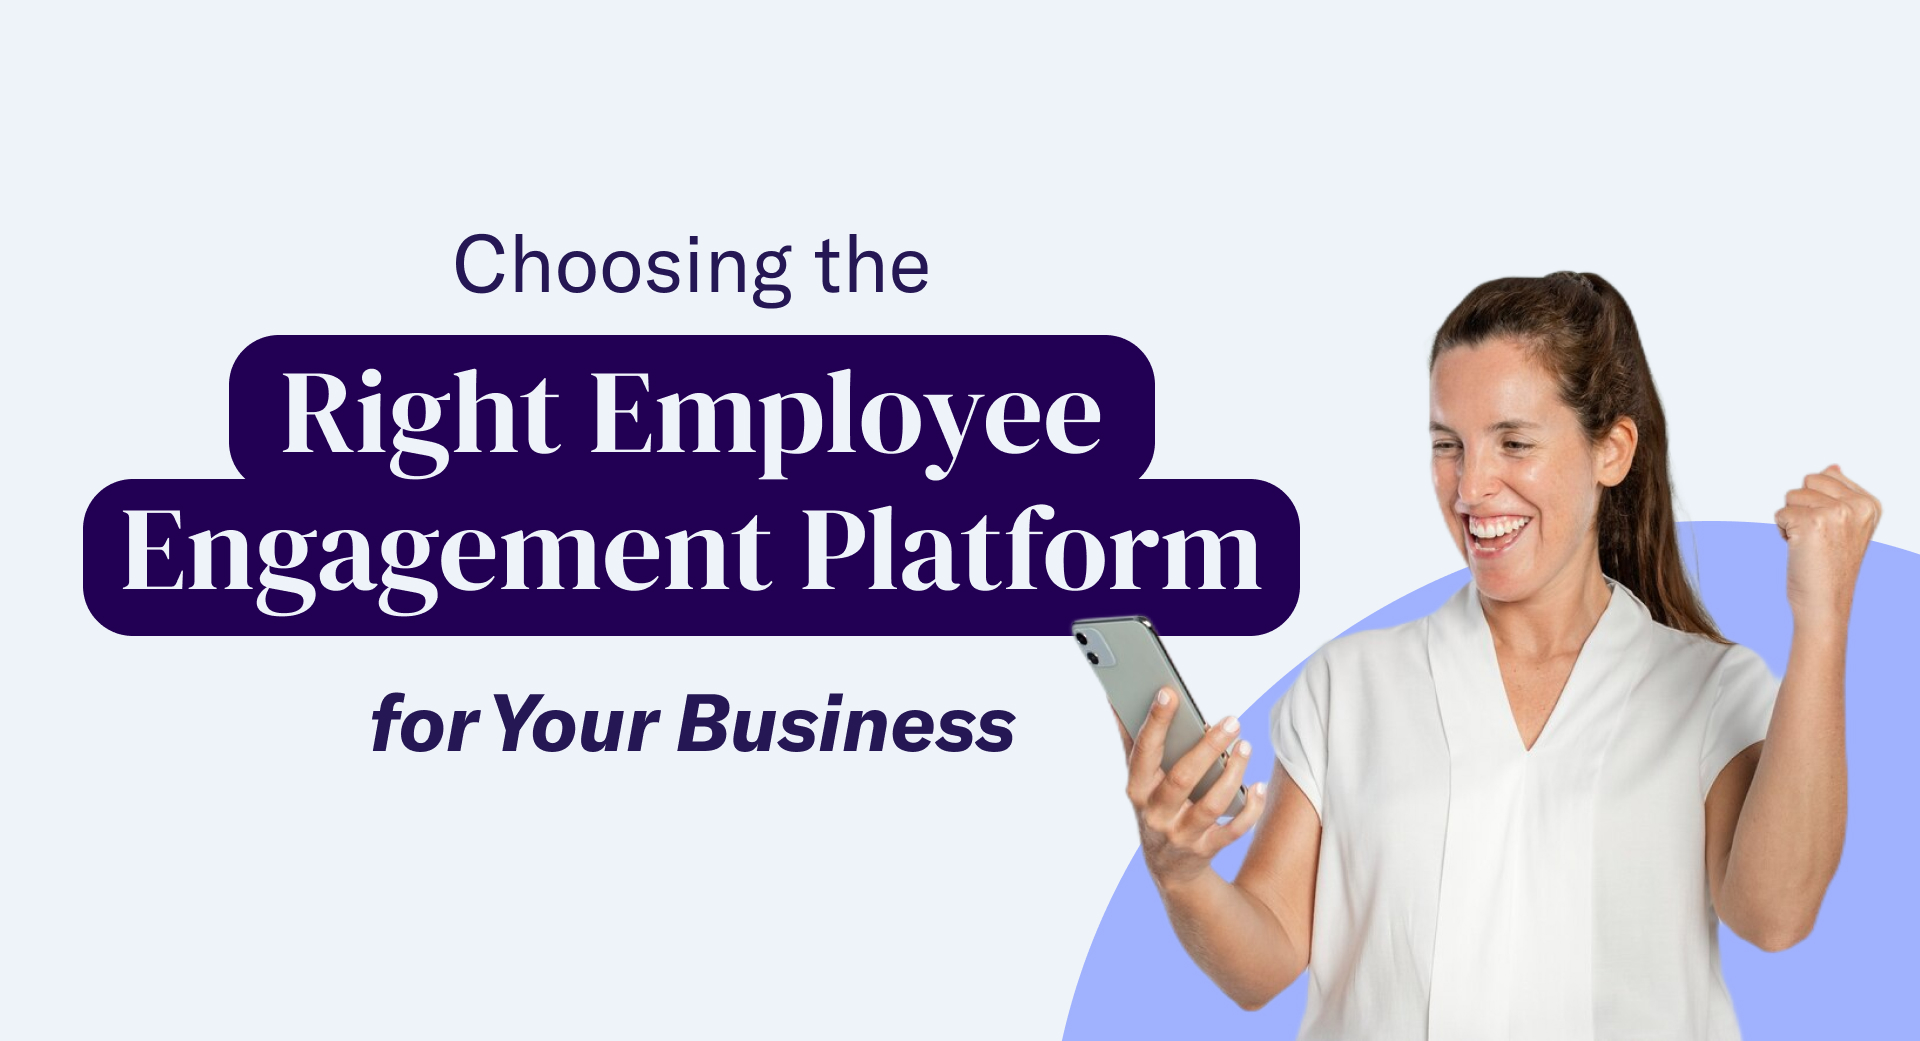 Choosing the Right Employee Engagement Platform for Your Business